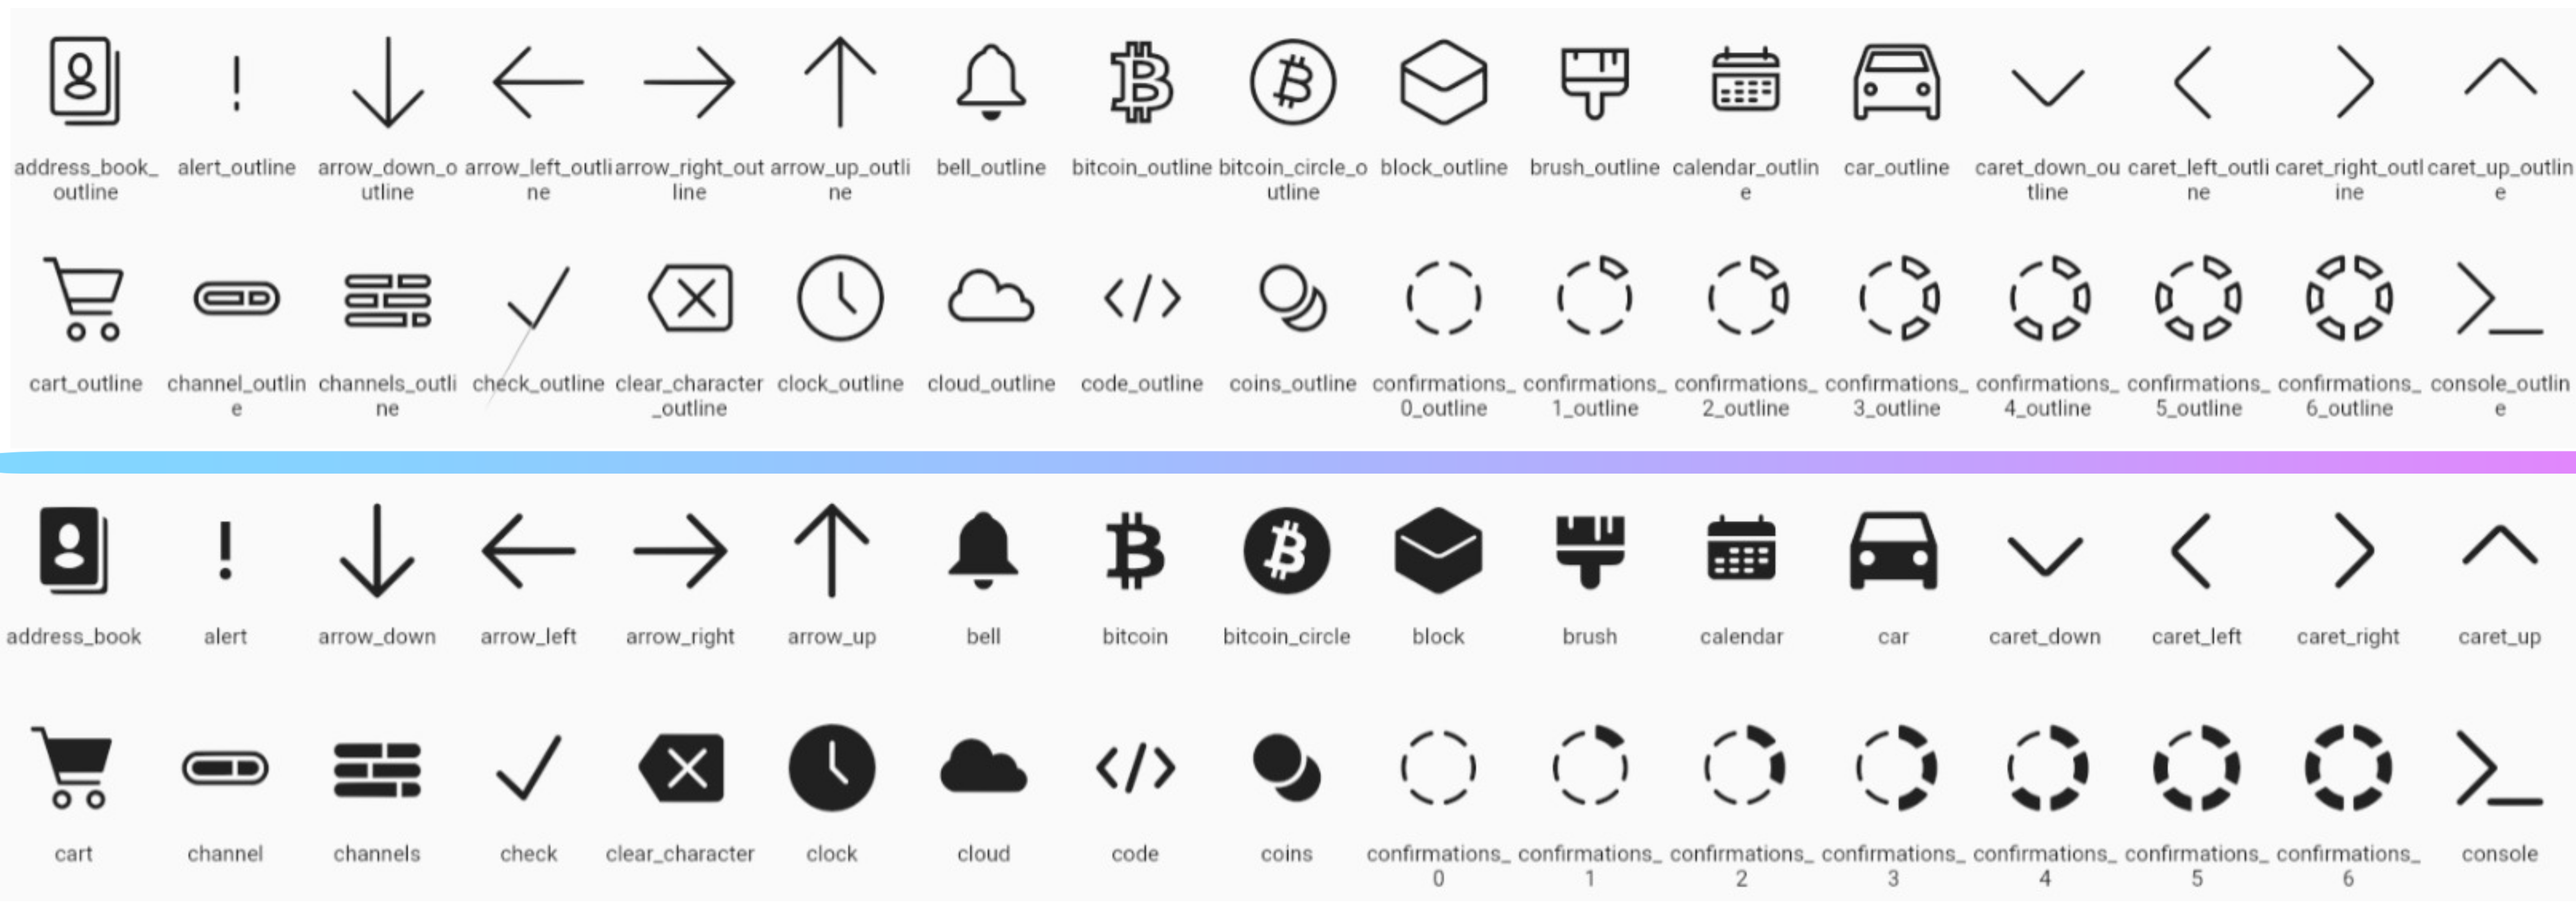 bitcoin_icons package